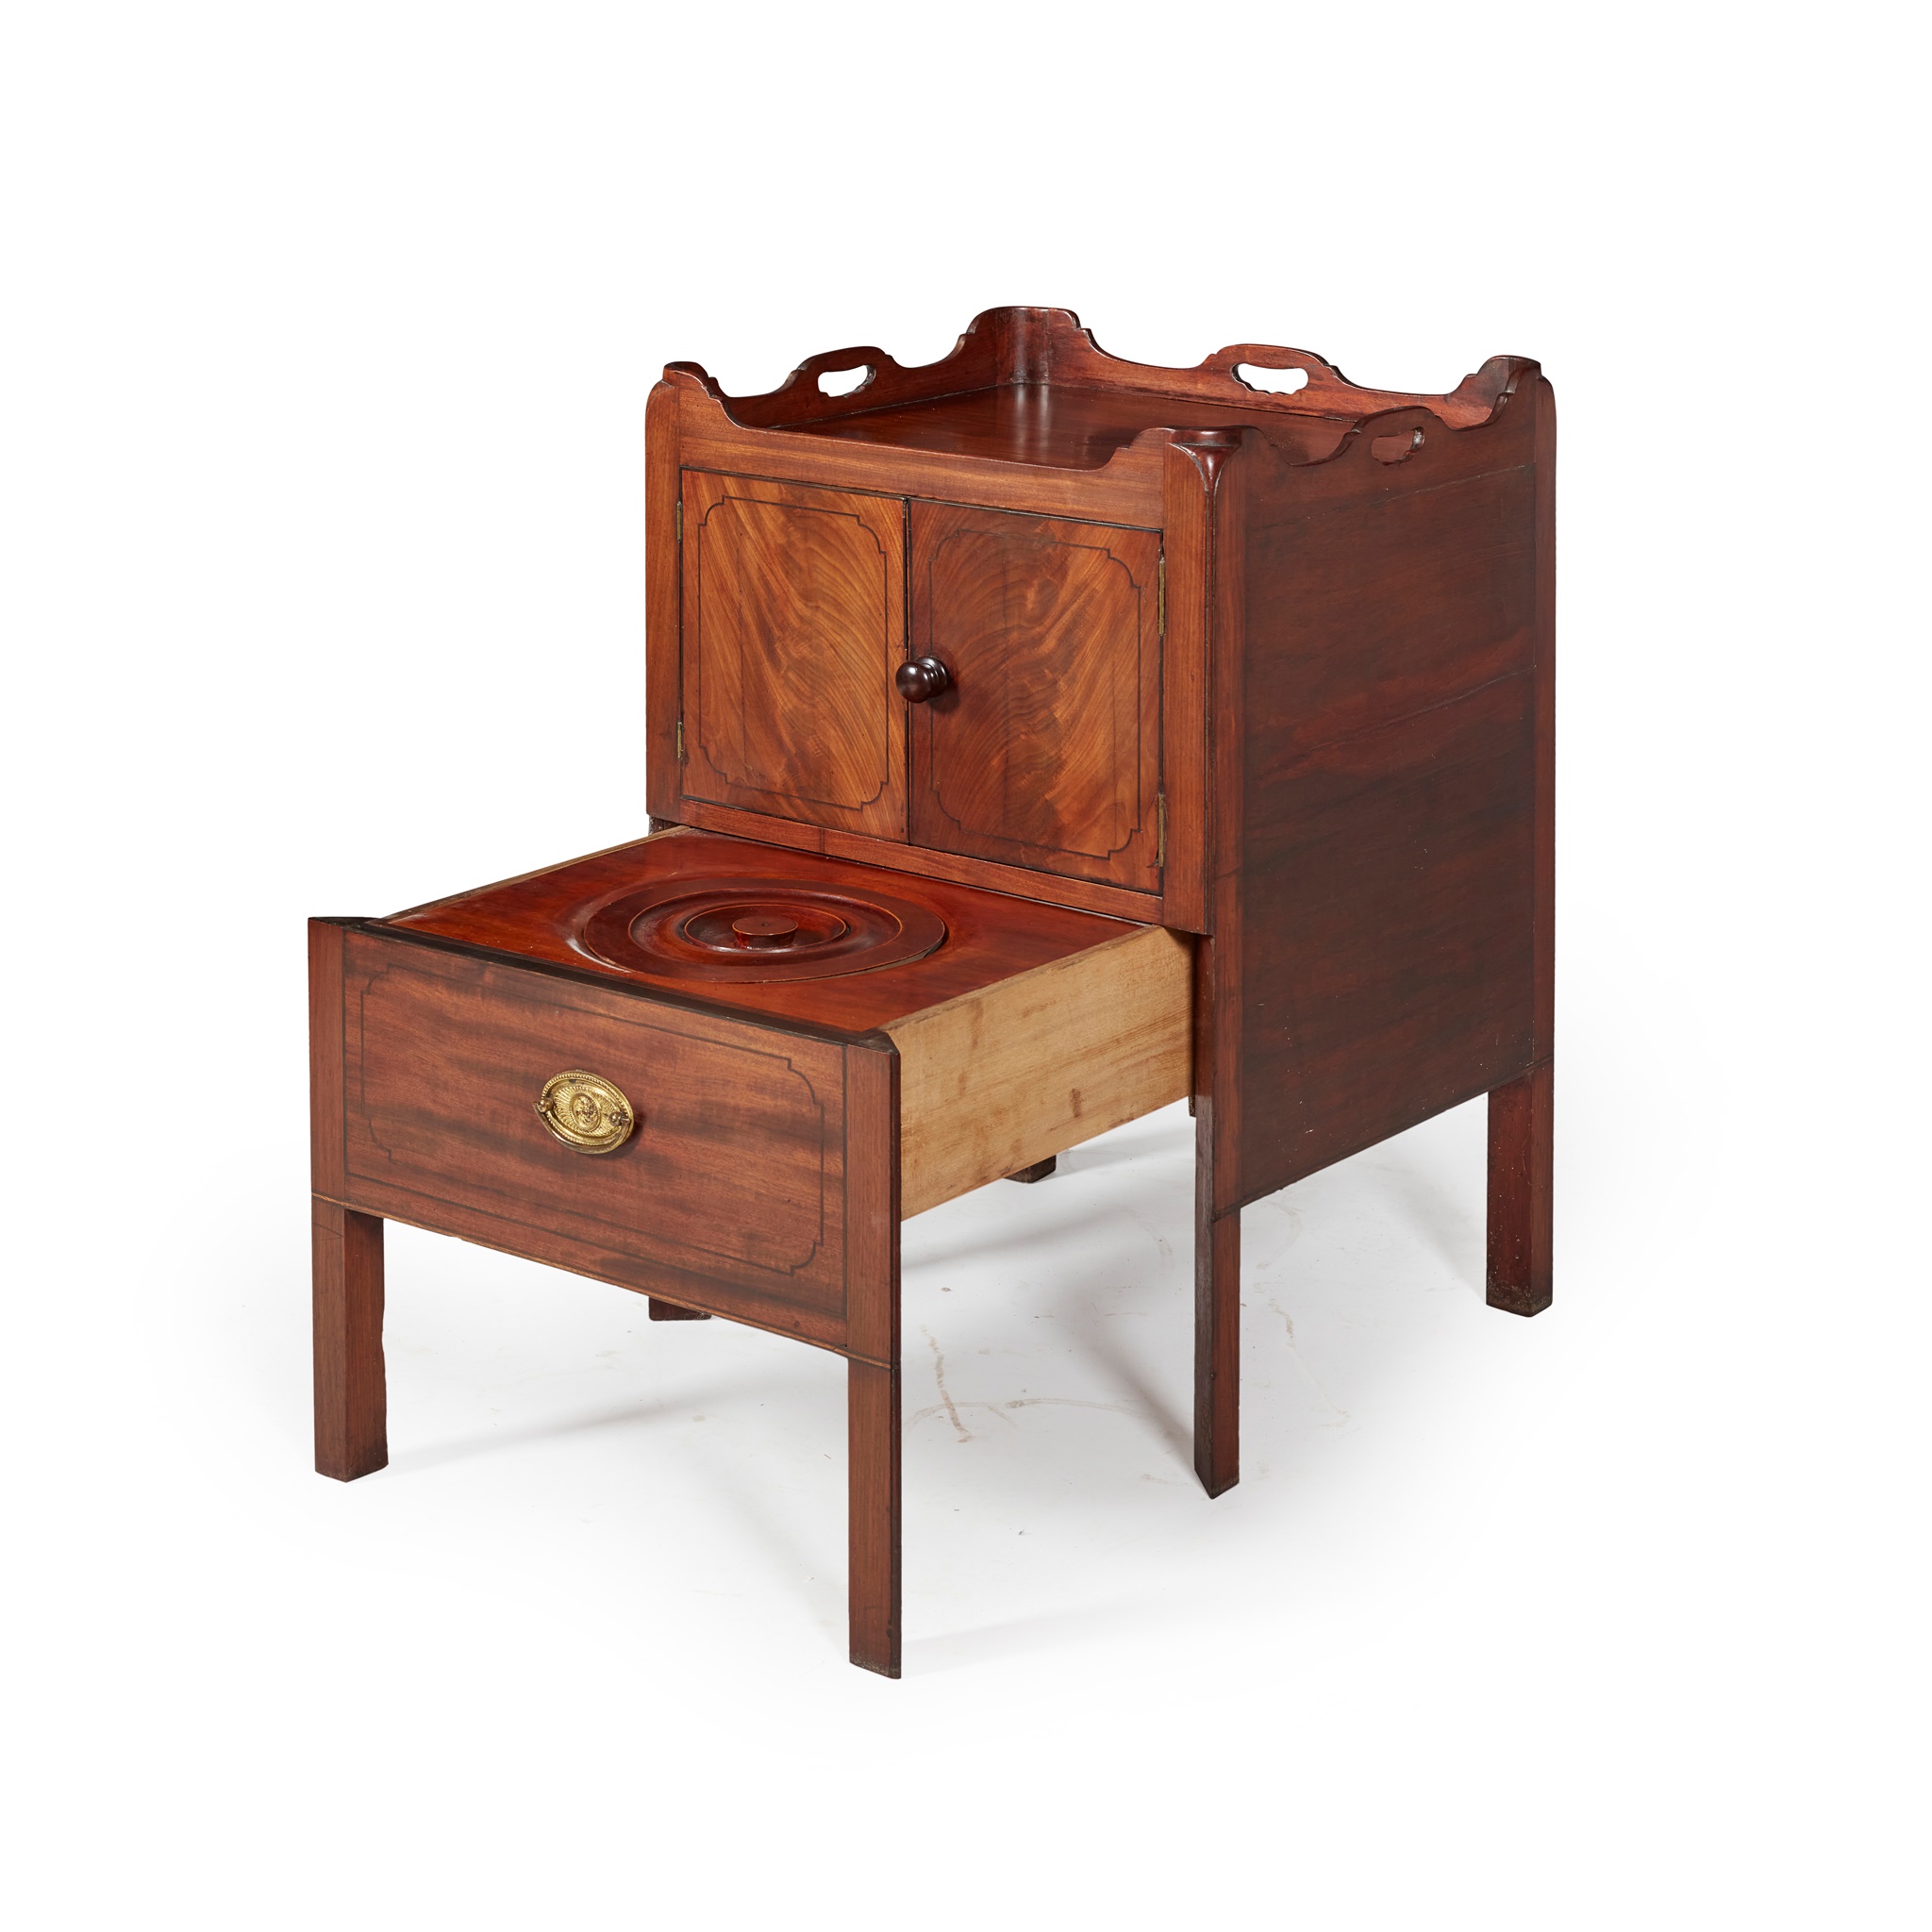 GEORGE III MAHOGANY BEDSIDE COMMODE 18TH CENTURY - Image 2 of 2